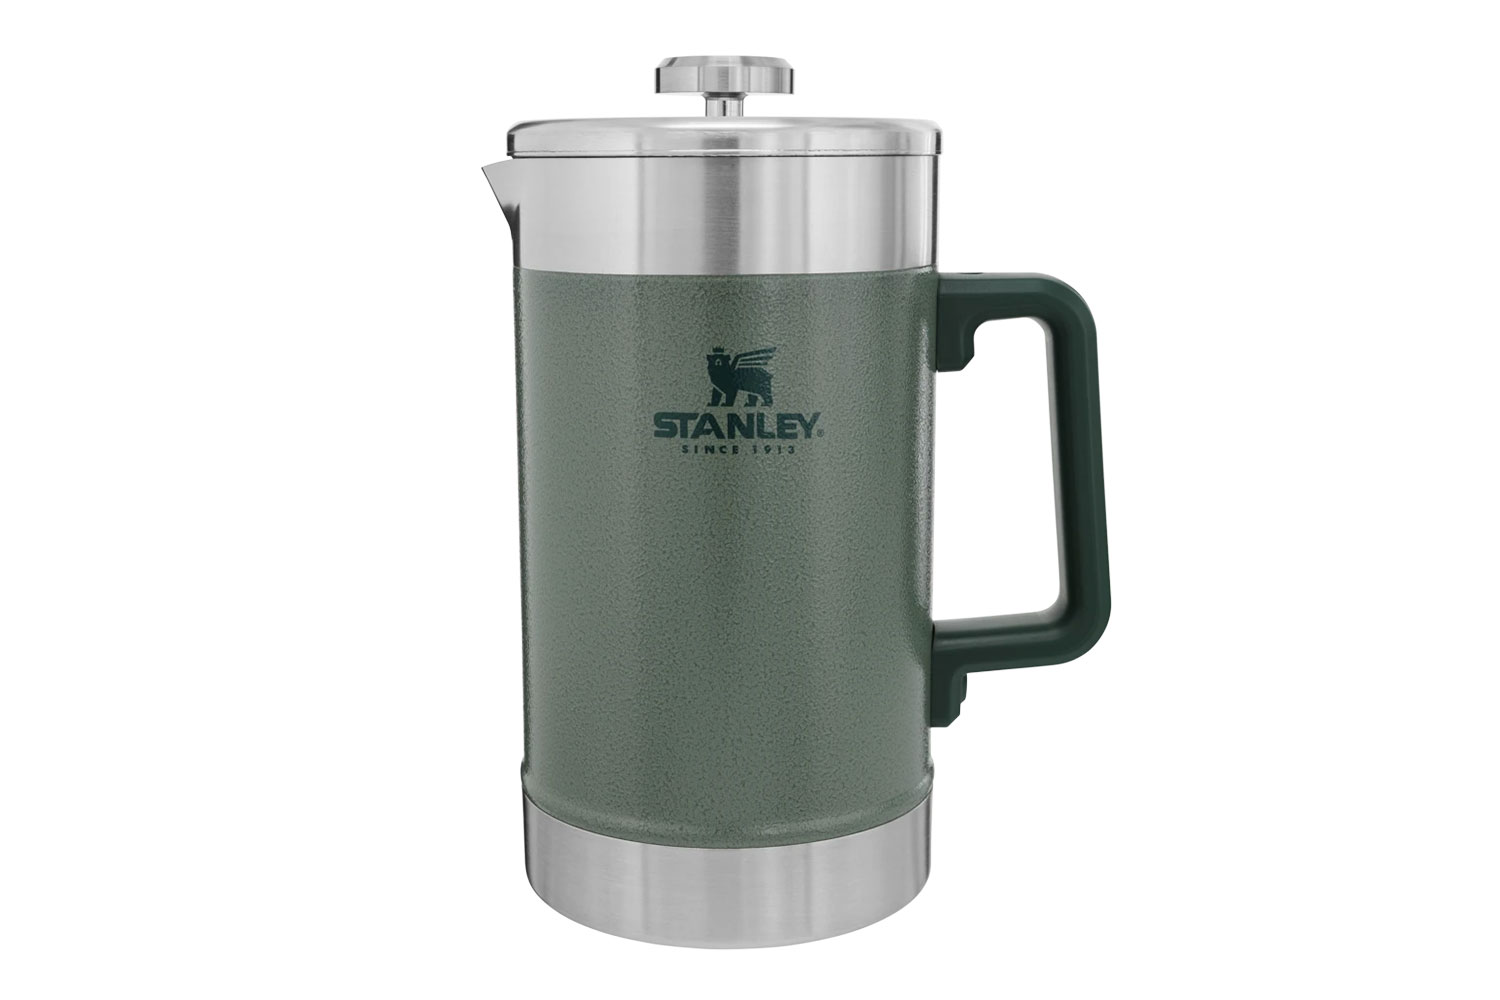 https://www.themanual.com/wp-content/uploads/sites/9/2020/08/stanley-classic-stay-hot-french-press.jpg?fit=800%2C800&p=1